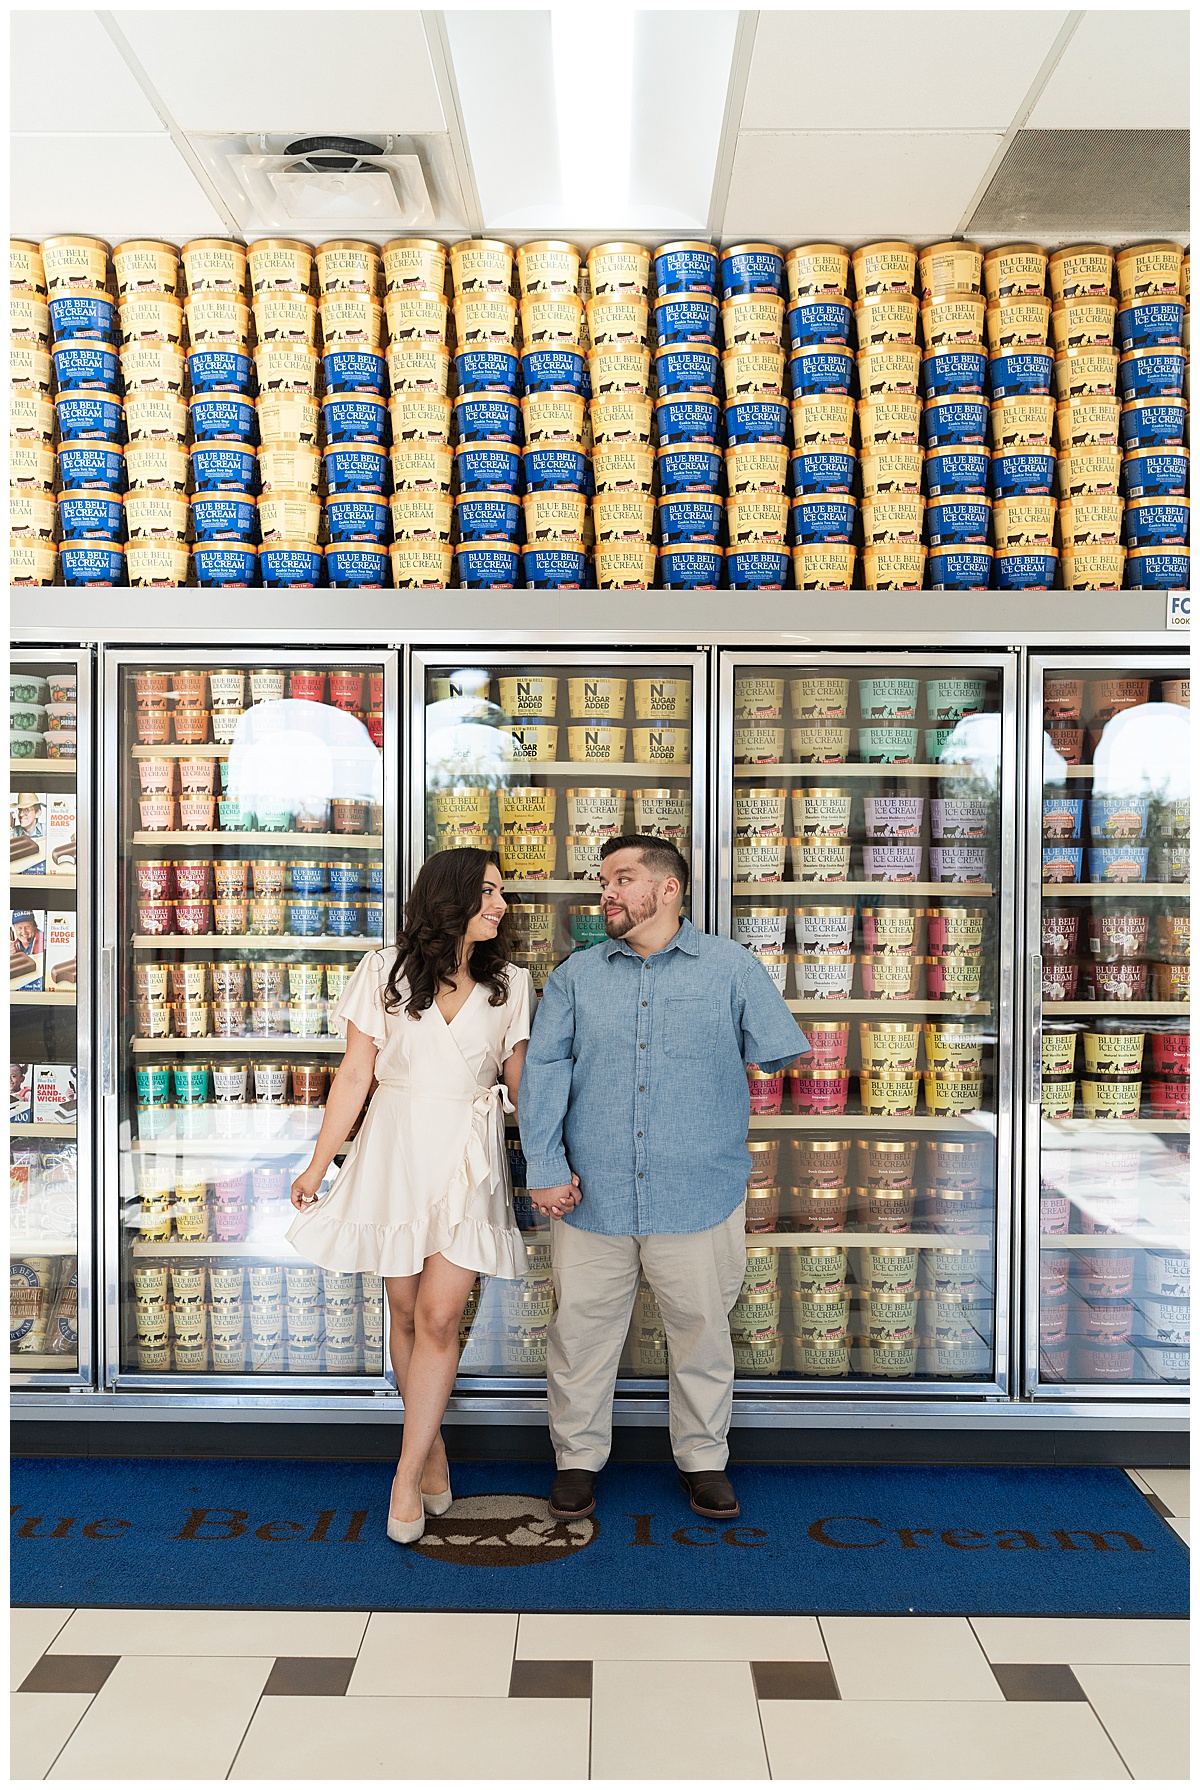 Two people share a smile in front of Blue Bell ice cream freezer for Swish & Click Photography